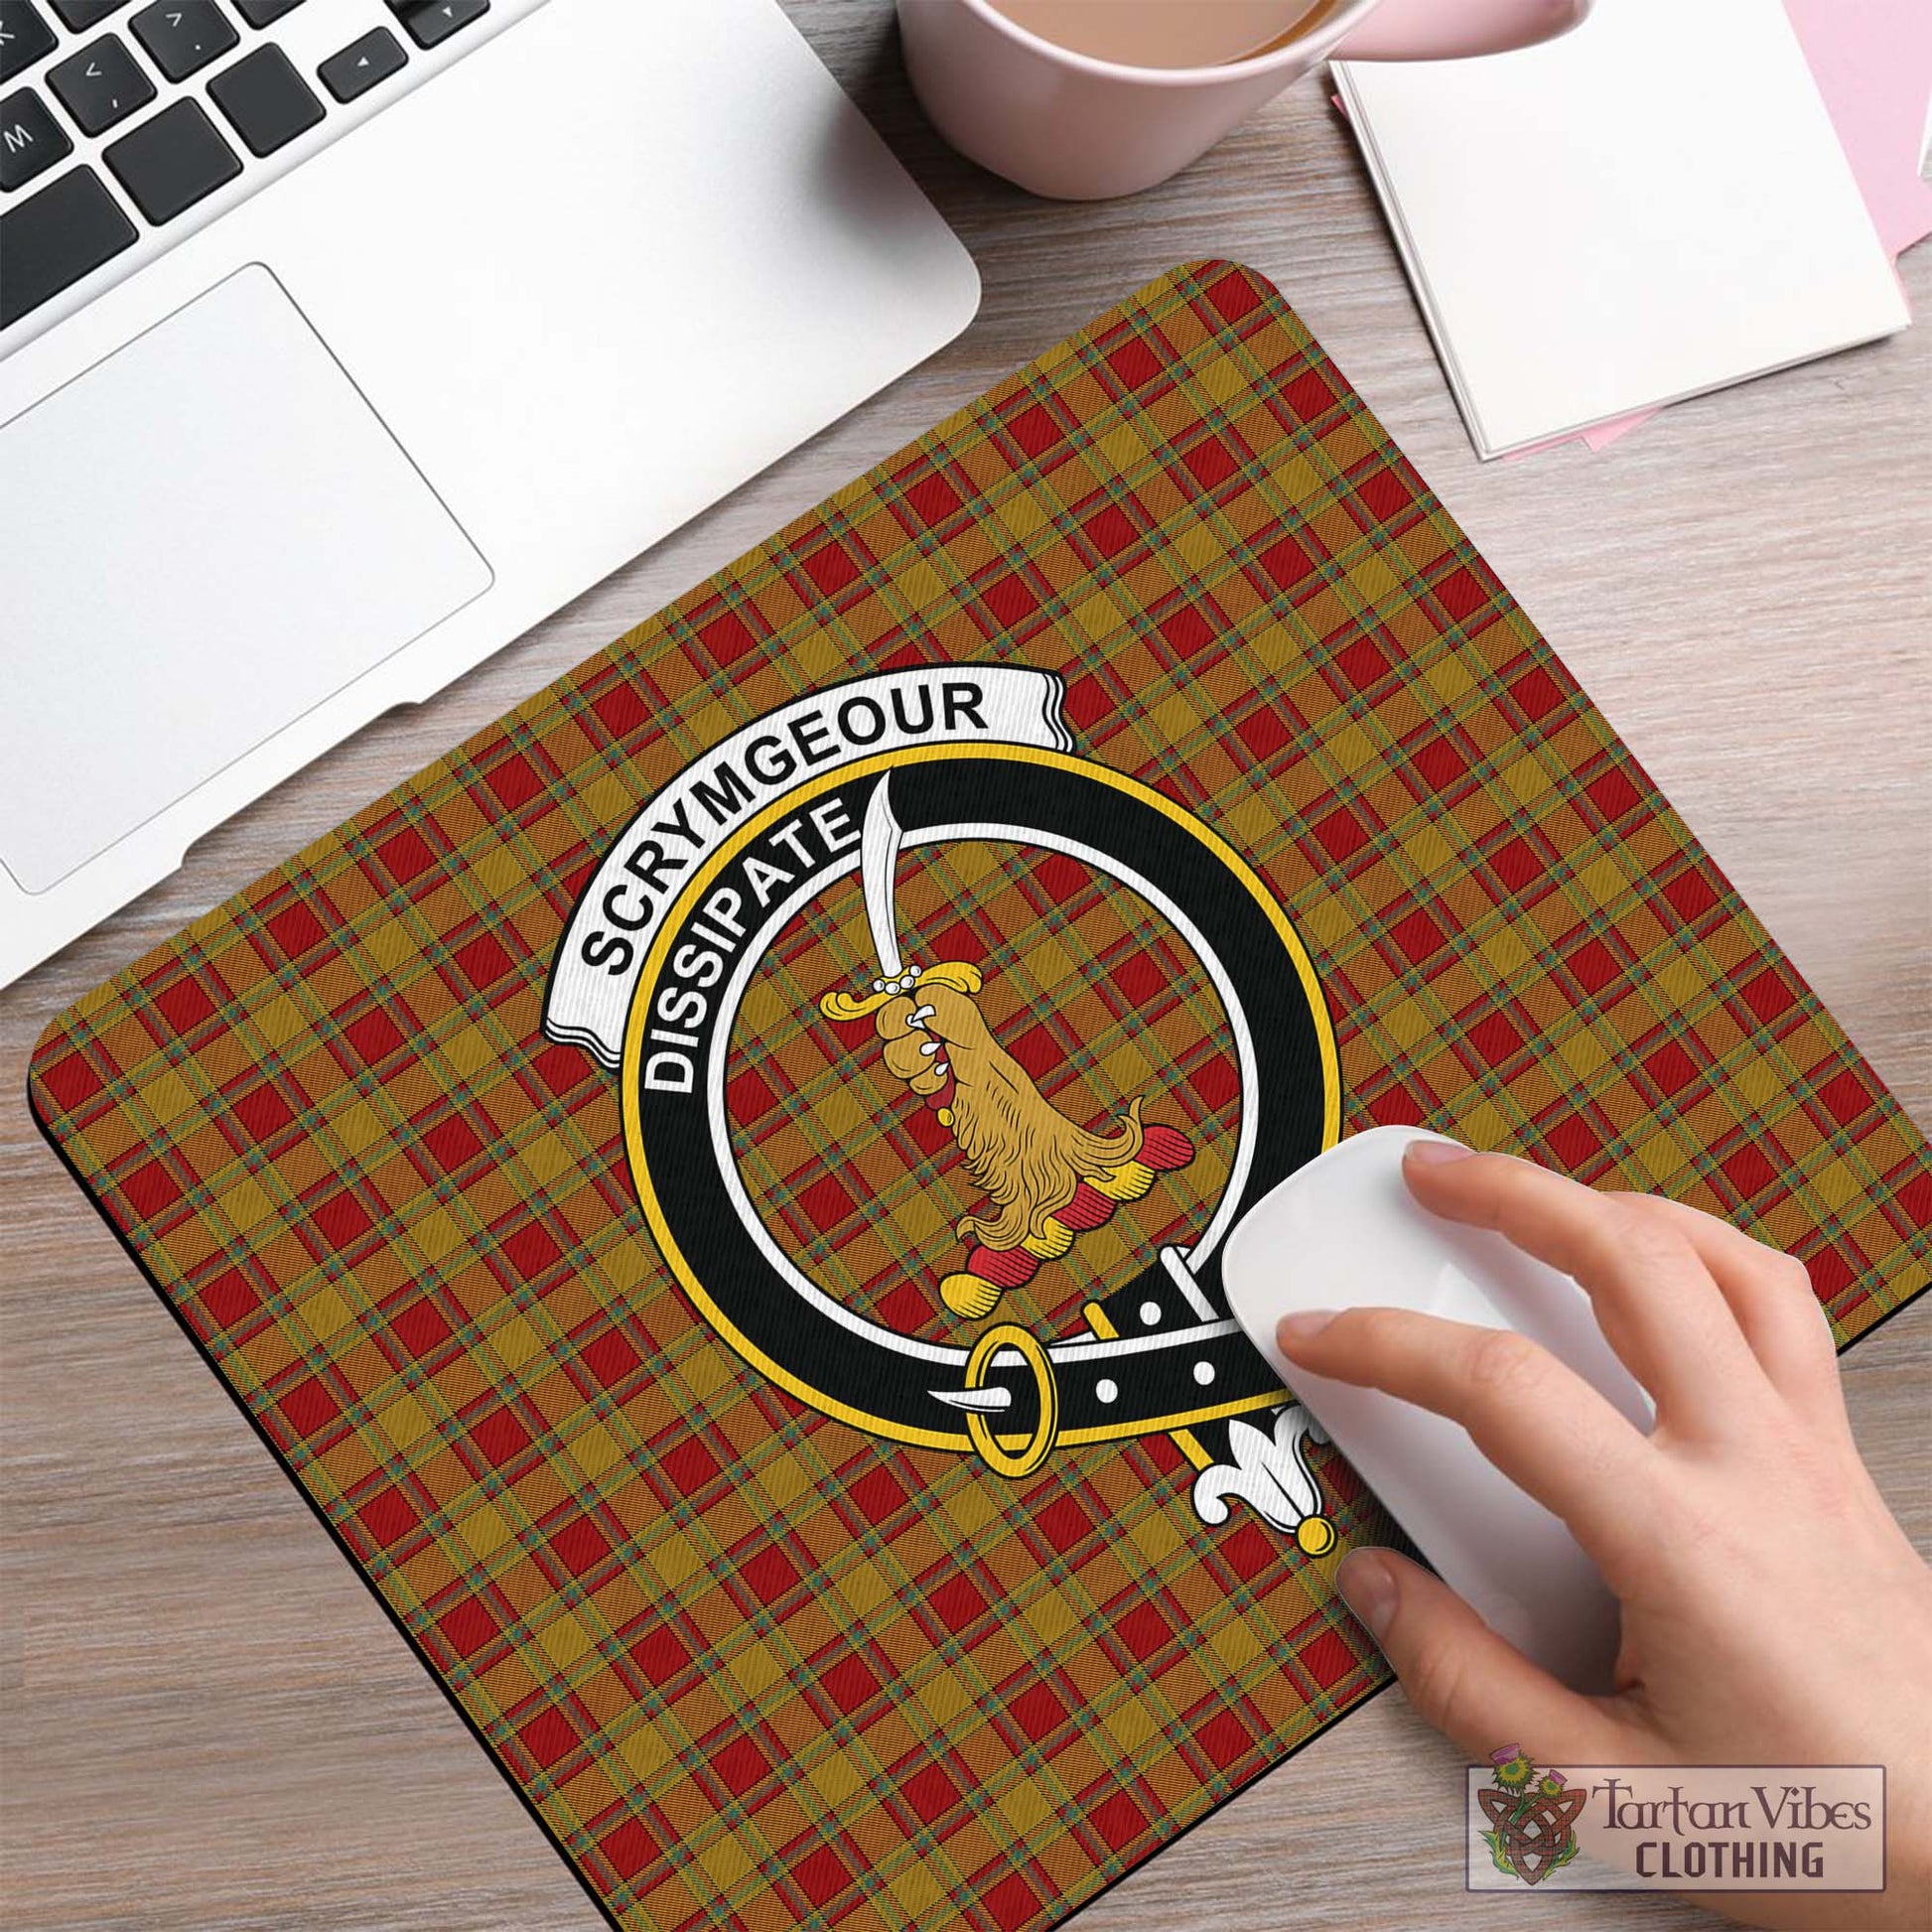 Tartan Vibes Clothing Scrymgeour Tartan Mouse Pad with Family Crest